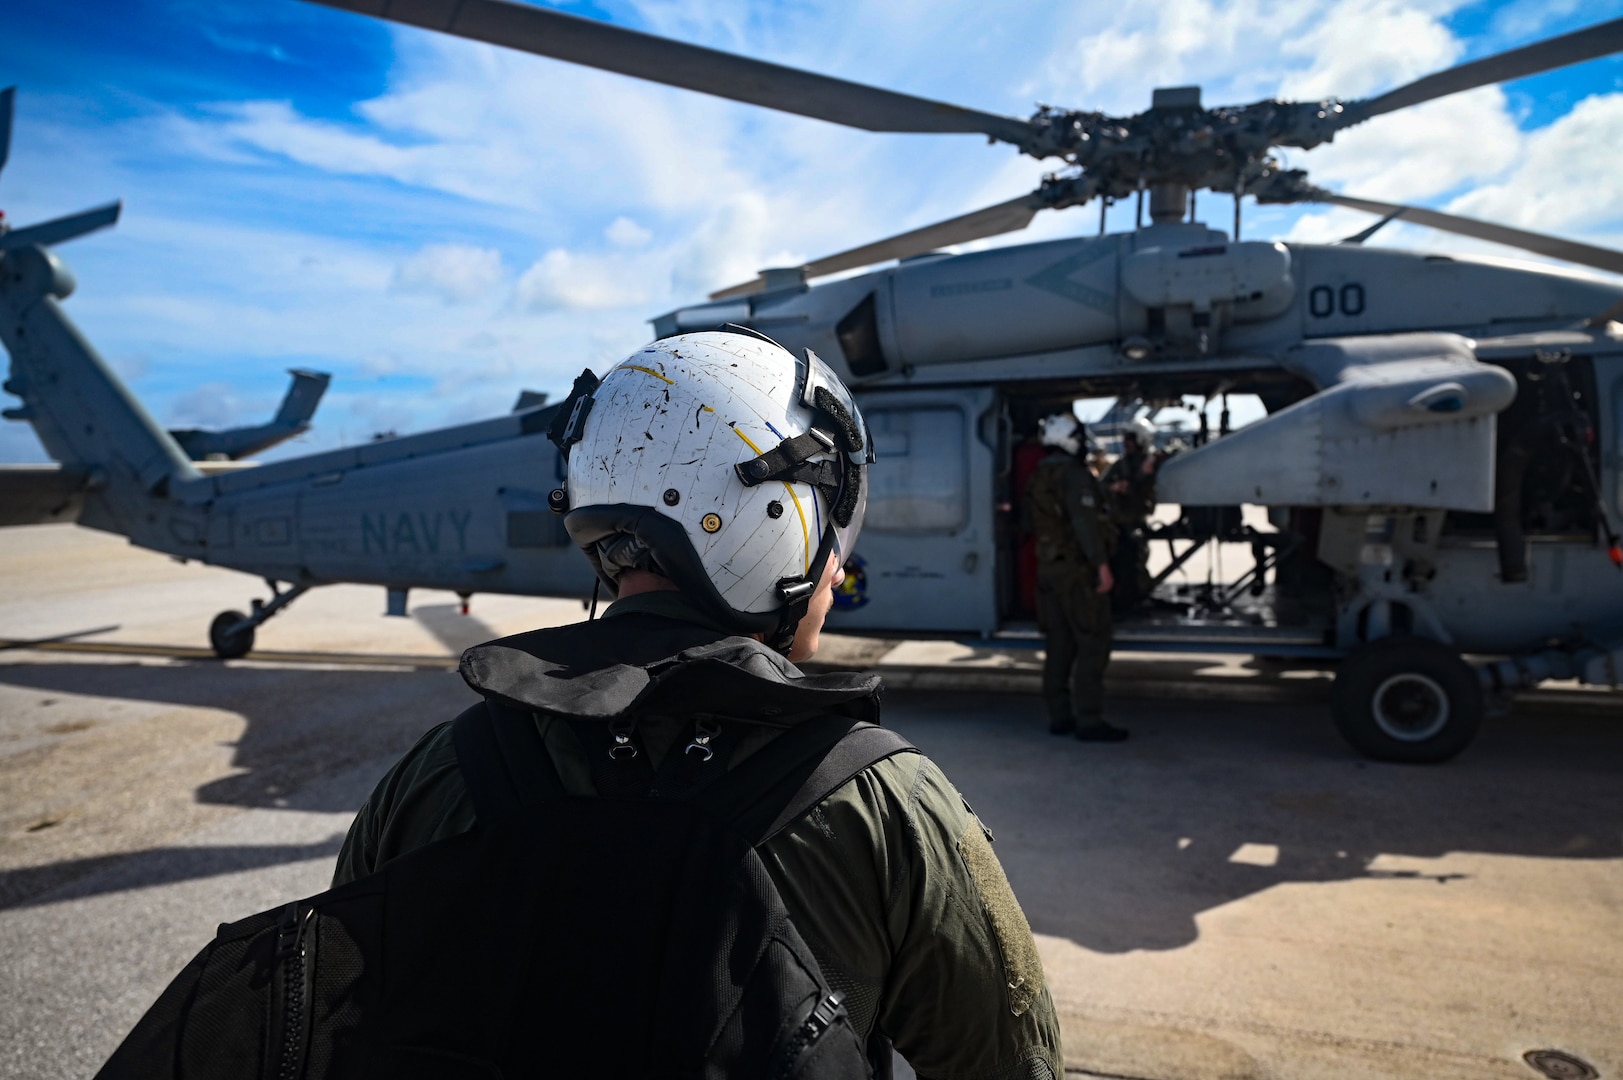 U.S. Navy Petty Officer 3rd Class Damian Maxilom, an aviation rescue swimmer assigned to Helicopter Sea Combat Squadron 25 prepares to board a MH-60S Knighthawk on Andersen Air Force Base, Guam, July 18, 2023. While flying a multinational Maritime Personnel Recovery training event during Mobility Guardian 23, the crew was called to rescue a hiker who had fallen off a mountainside. MG23 is a mobility exercise held across a 3,000-mile area intended to deepen interoperability with U.S. Allies and partners, bolstering the collective ability to support a free and open Indo-Pacific area. (U.S. Air Force photo by Tech. Sgt. Michael Cossaboom)